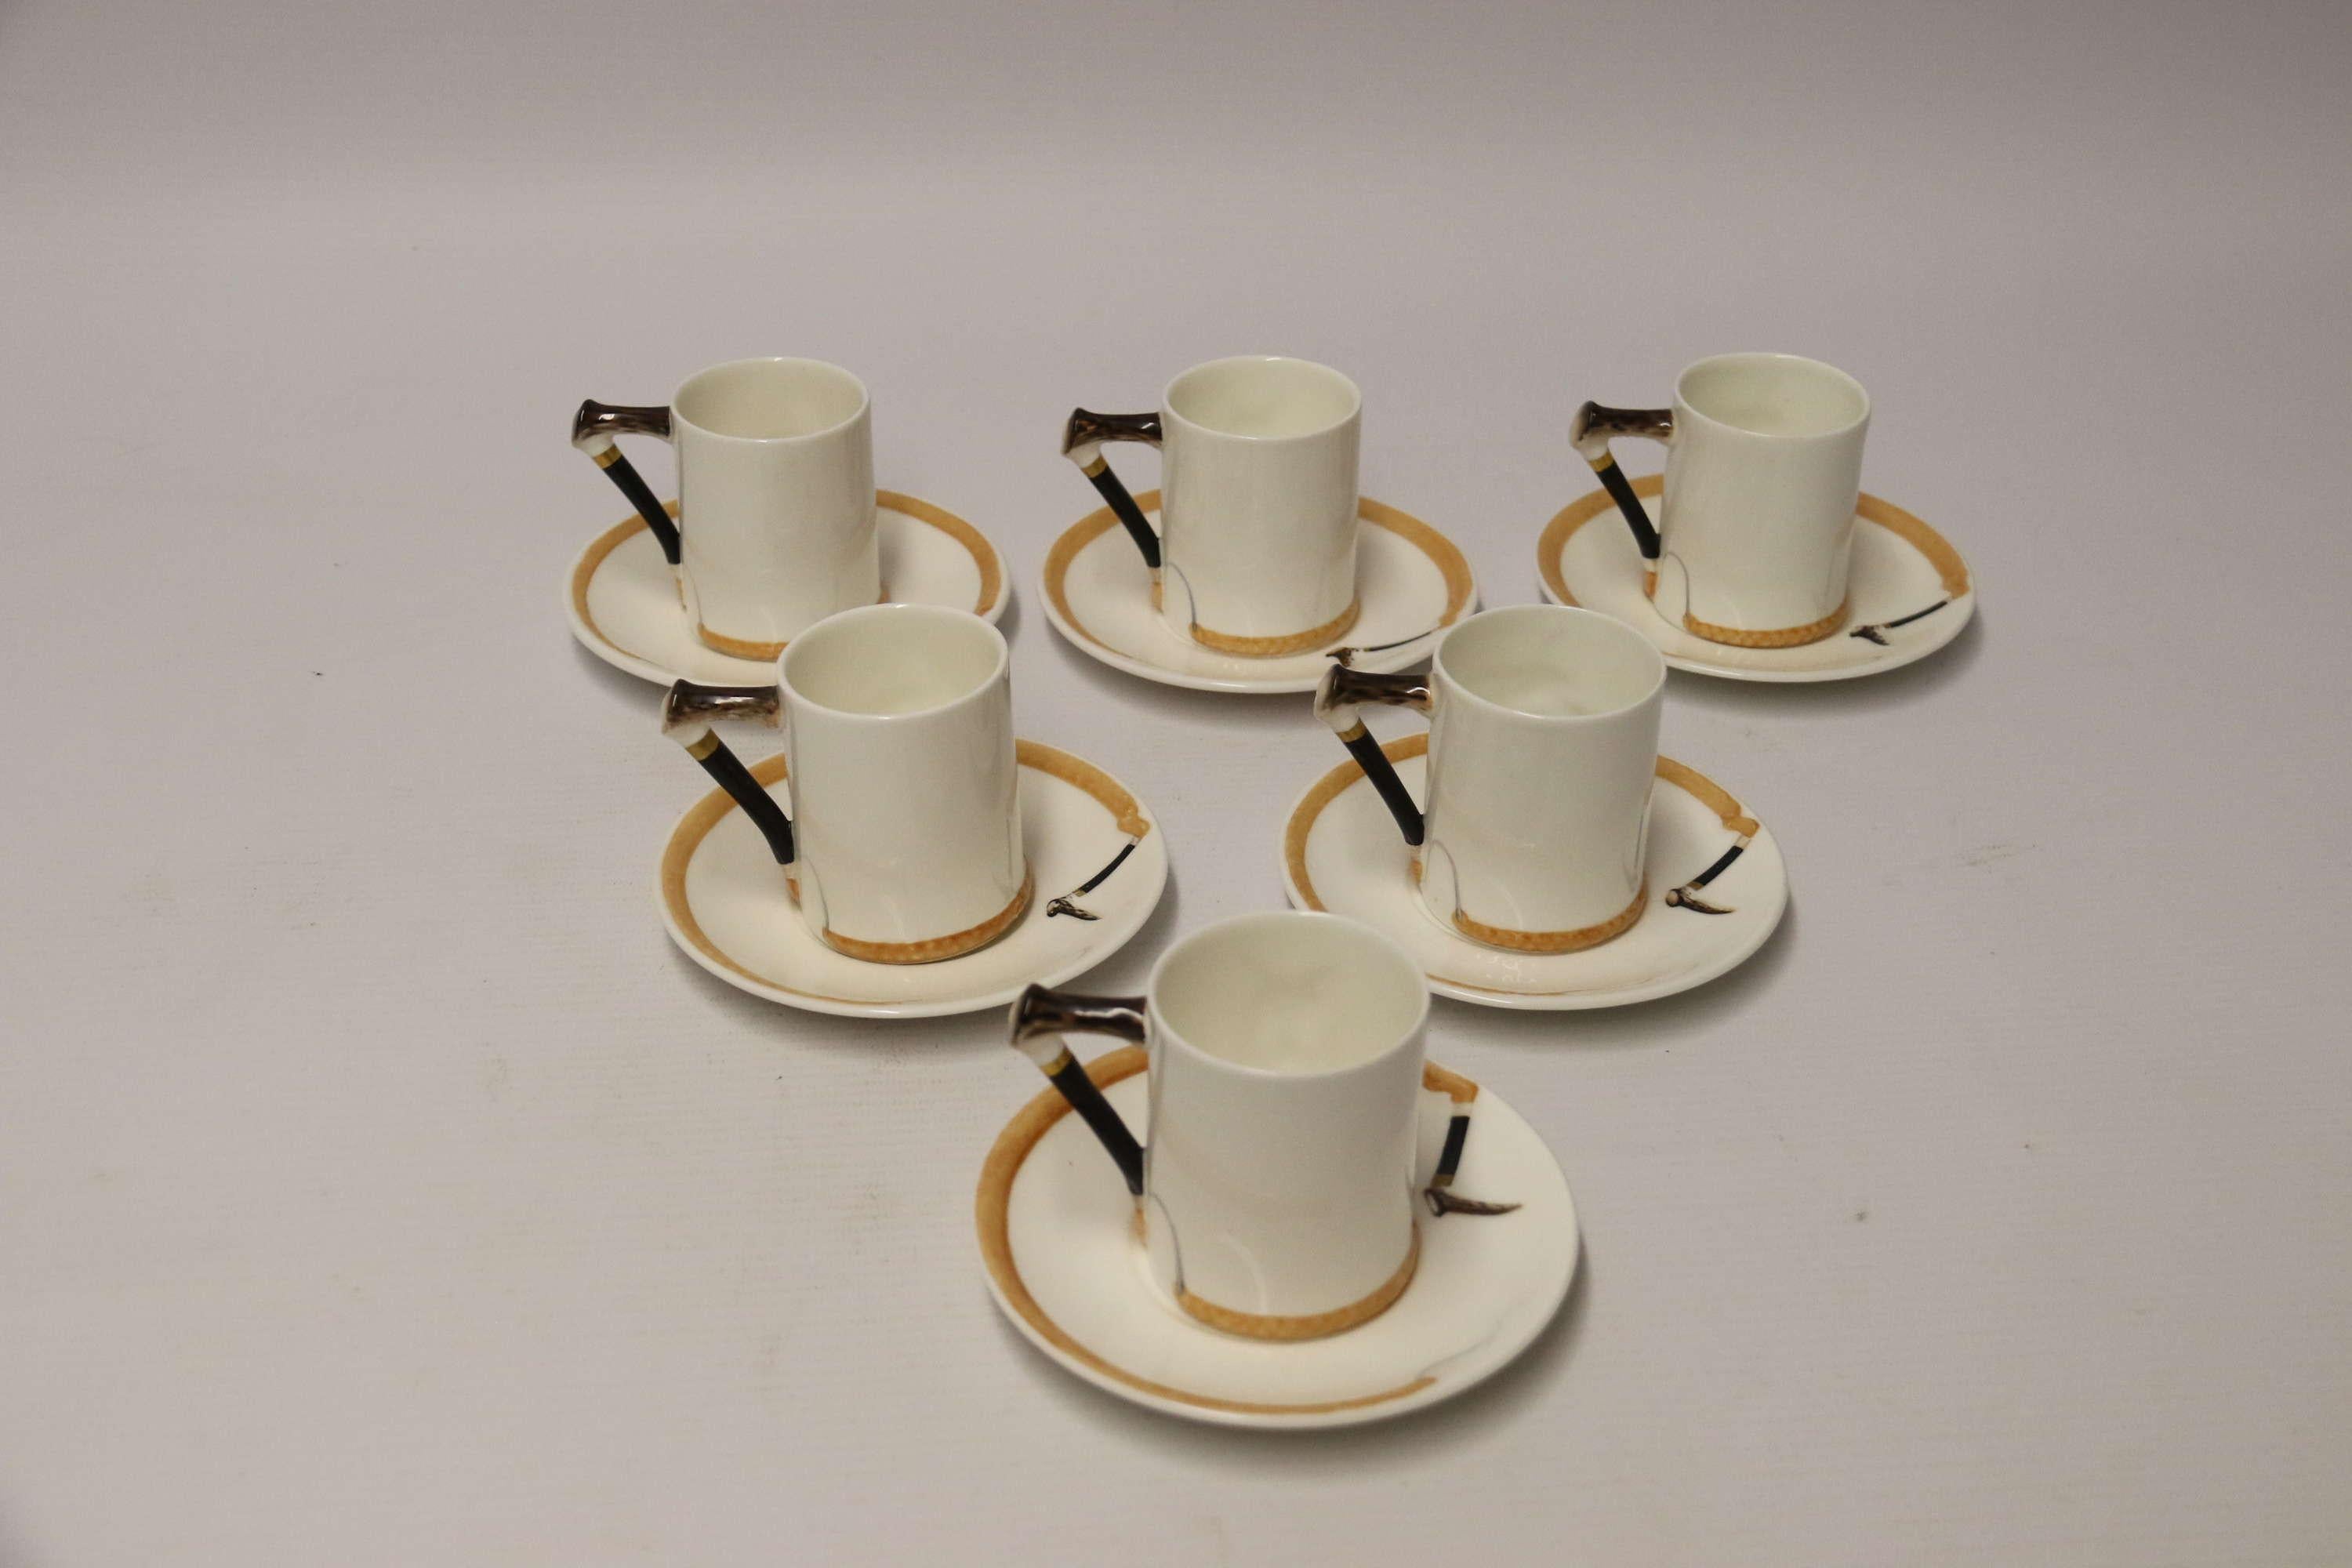 A set of six English fox hunting Royal Doulton coffee cups and saucers.

A highly decorative set of six English Royal Doulton coffee cups and saucers with a set of silver plated coffee spoons. This interesting set is of fox hunting interest. Each